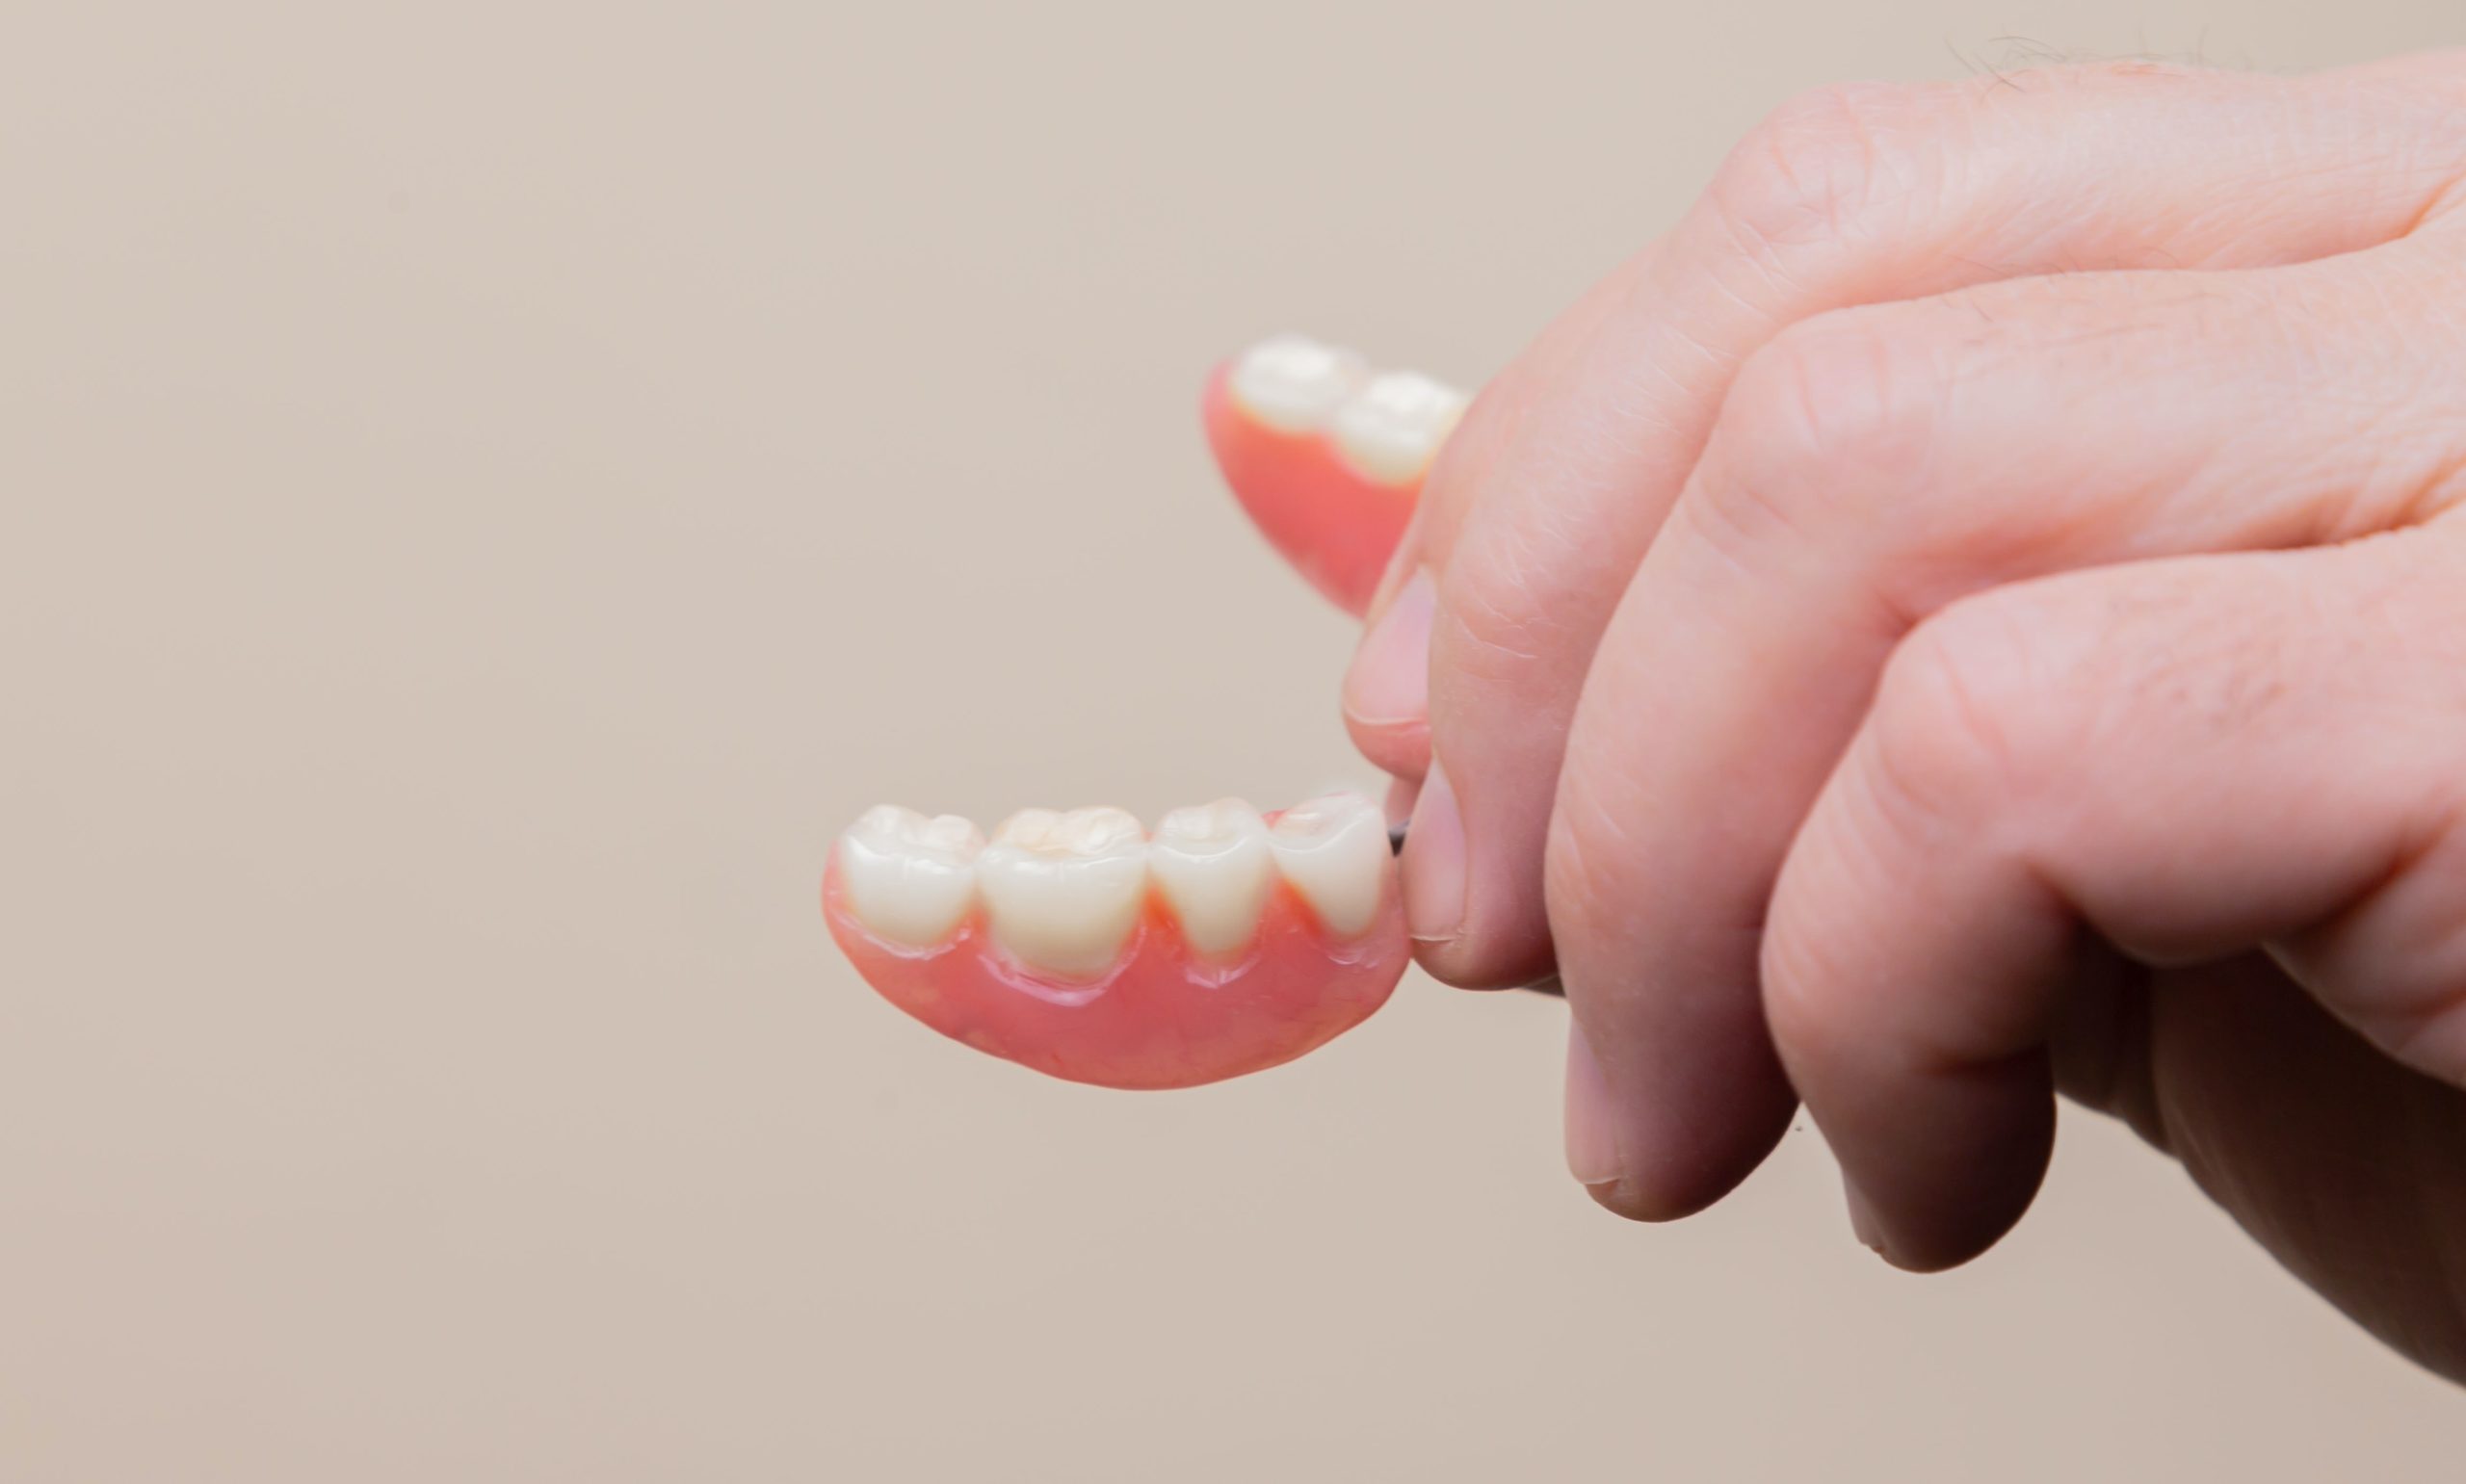 dentures care tips